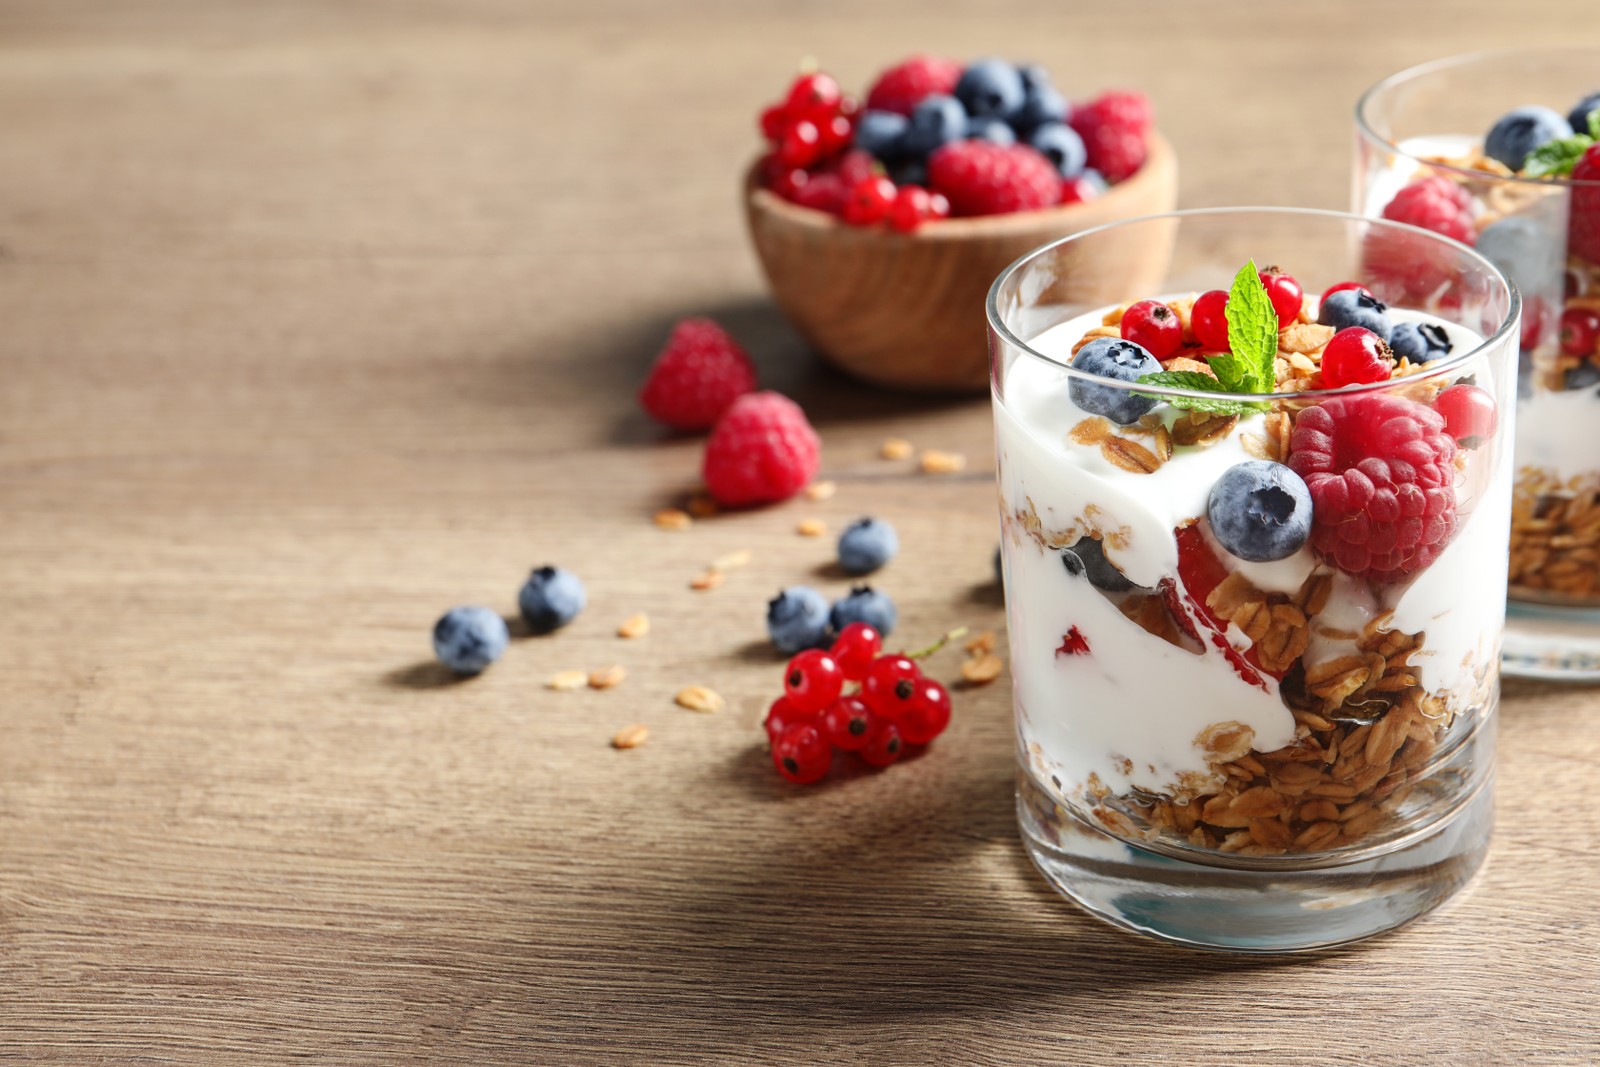 Photo of tasty dessert with yogurt, berries and granola on wooden table. Space for text